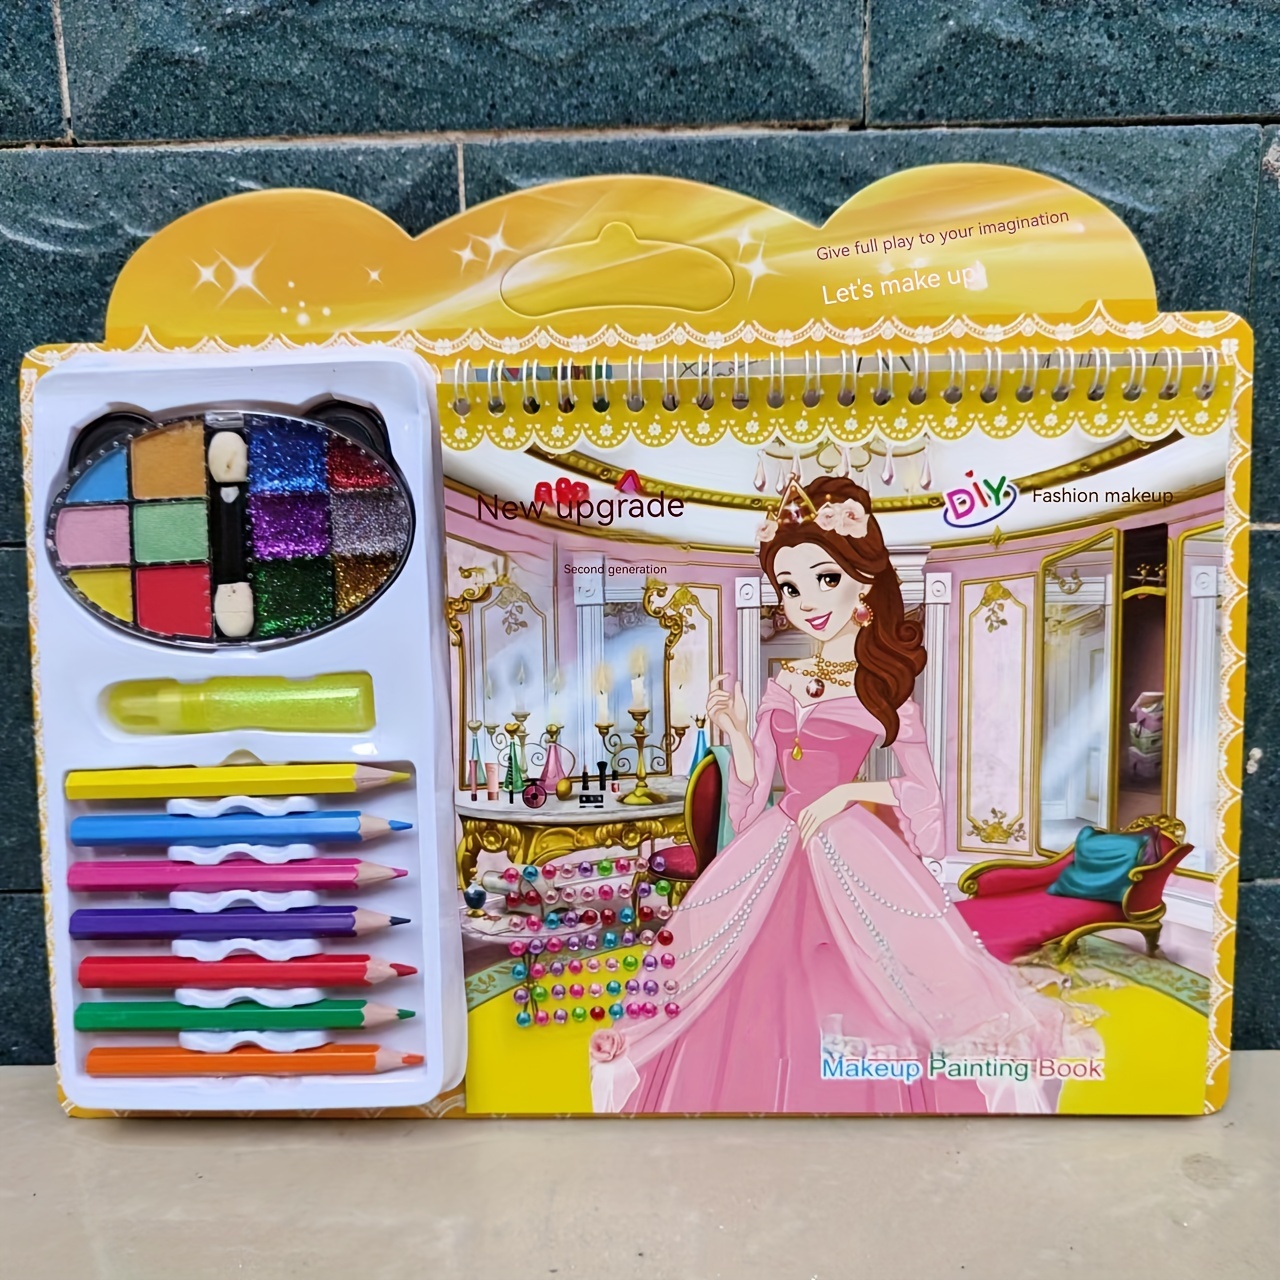 4Pcs Fantasy Princess C Kid Toy Fashion Drawing Creative Poke Art Book For  Girls Ages 8-12, Puzzle Puncture Painting With Princess Board Stickers, Kids  Art Education Book, Art Diy Craft Kit Gifts